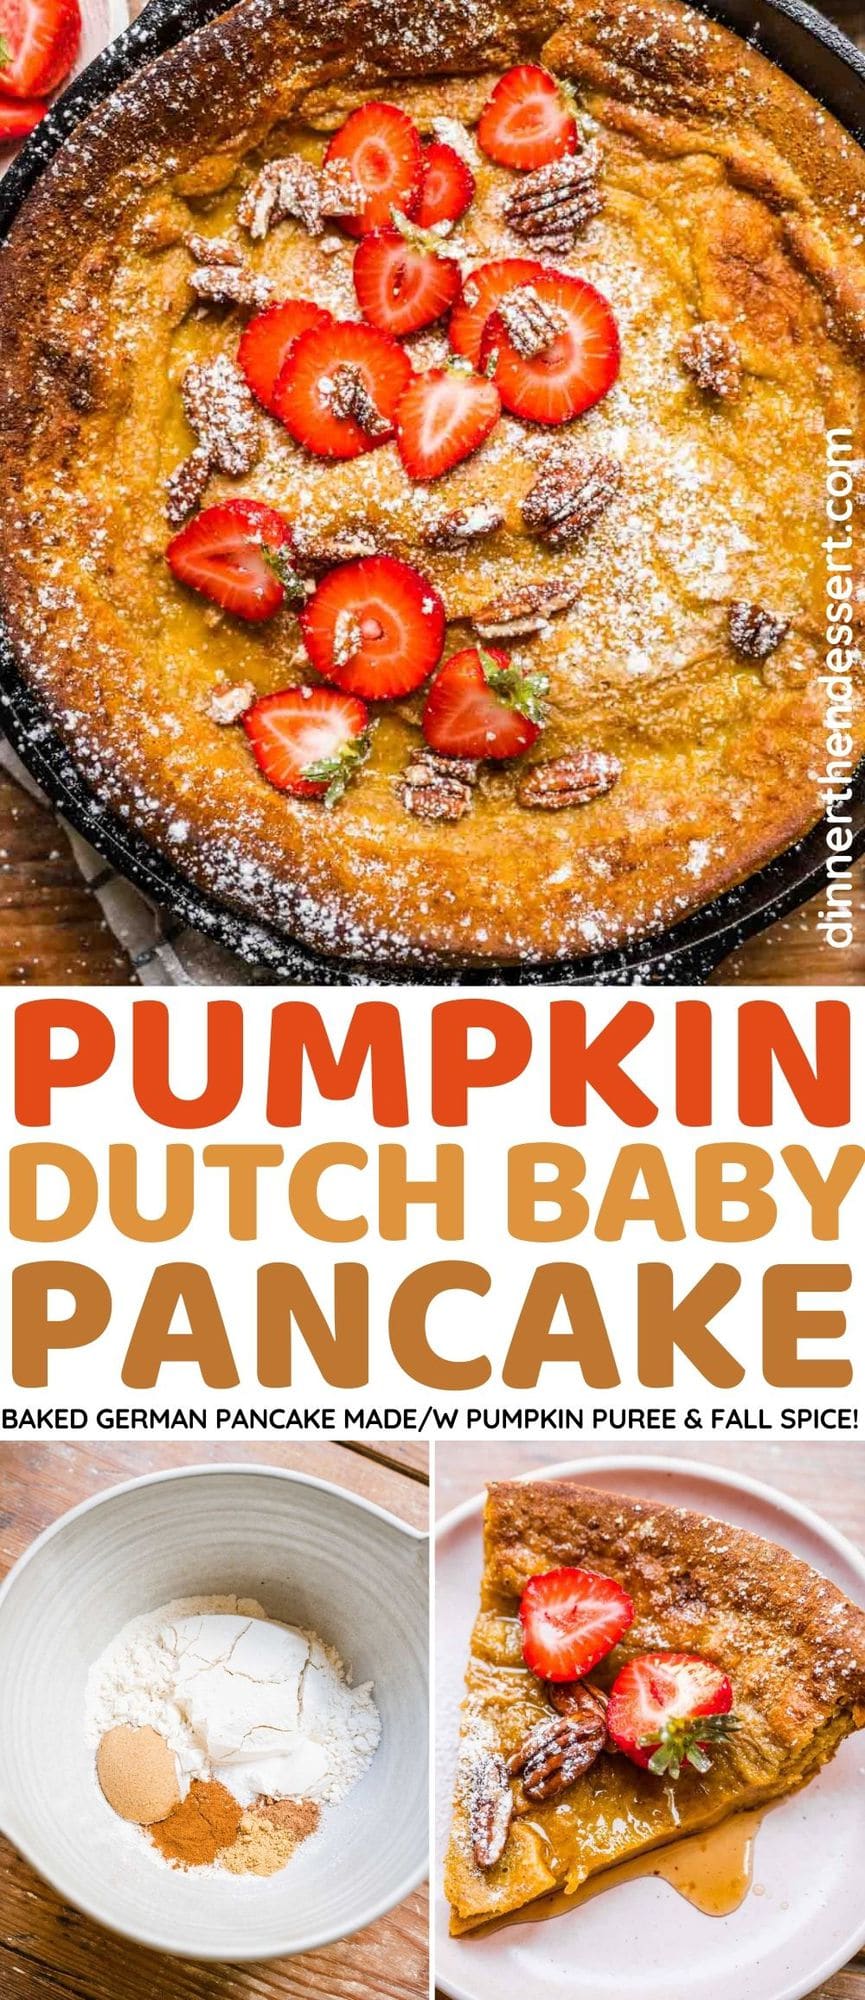 Pumpkin Dutch Baby Pancake baked in skillet with strawberries and powdered sugar on top collage